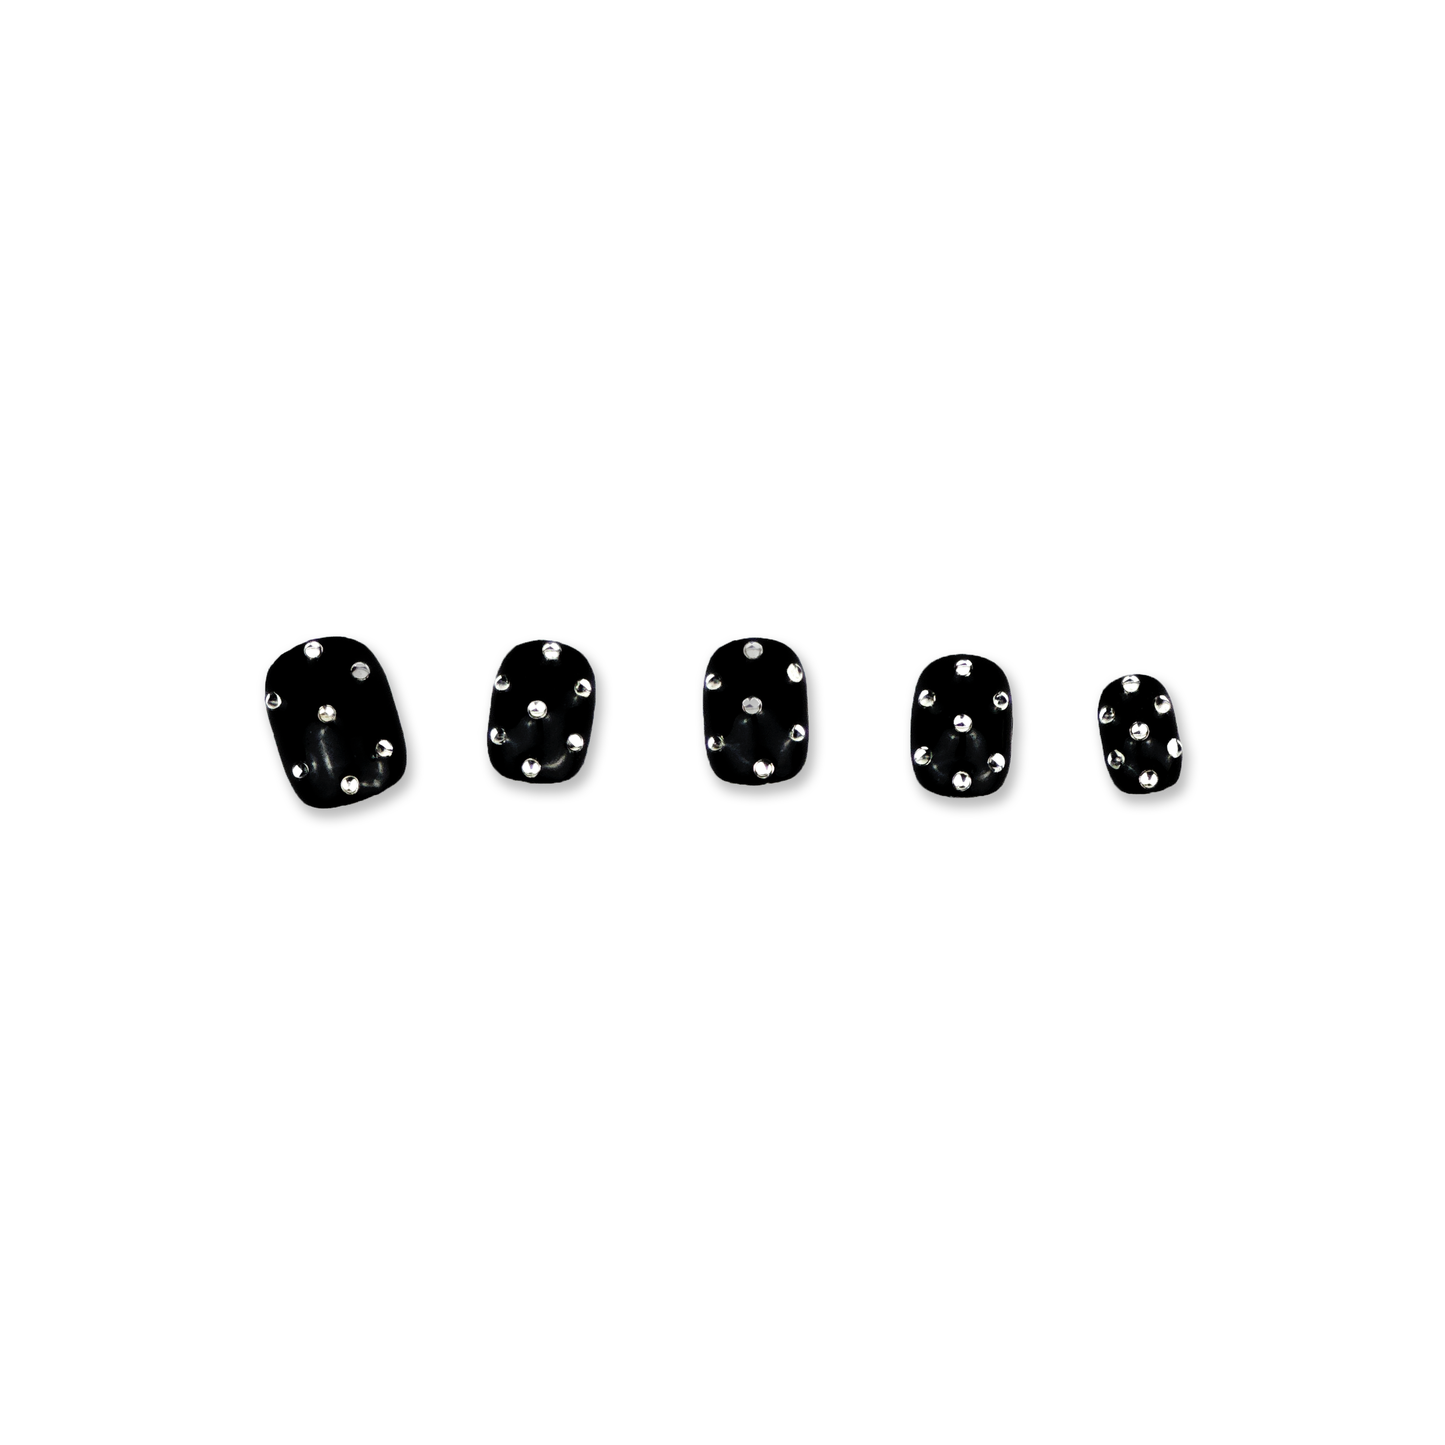 Greedy dots - Instant nails, Handmade Luxury Press on nails, Fashion Accessories